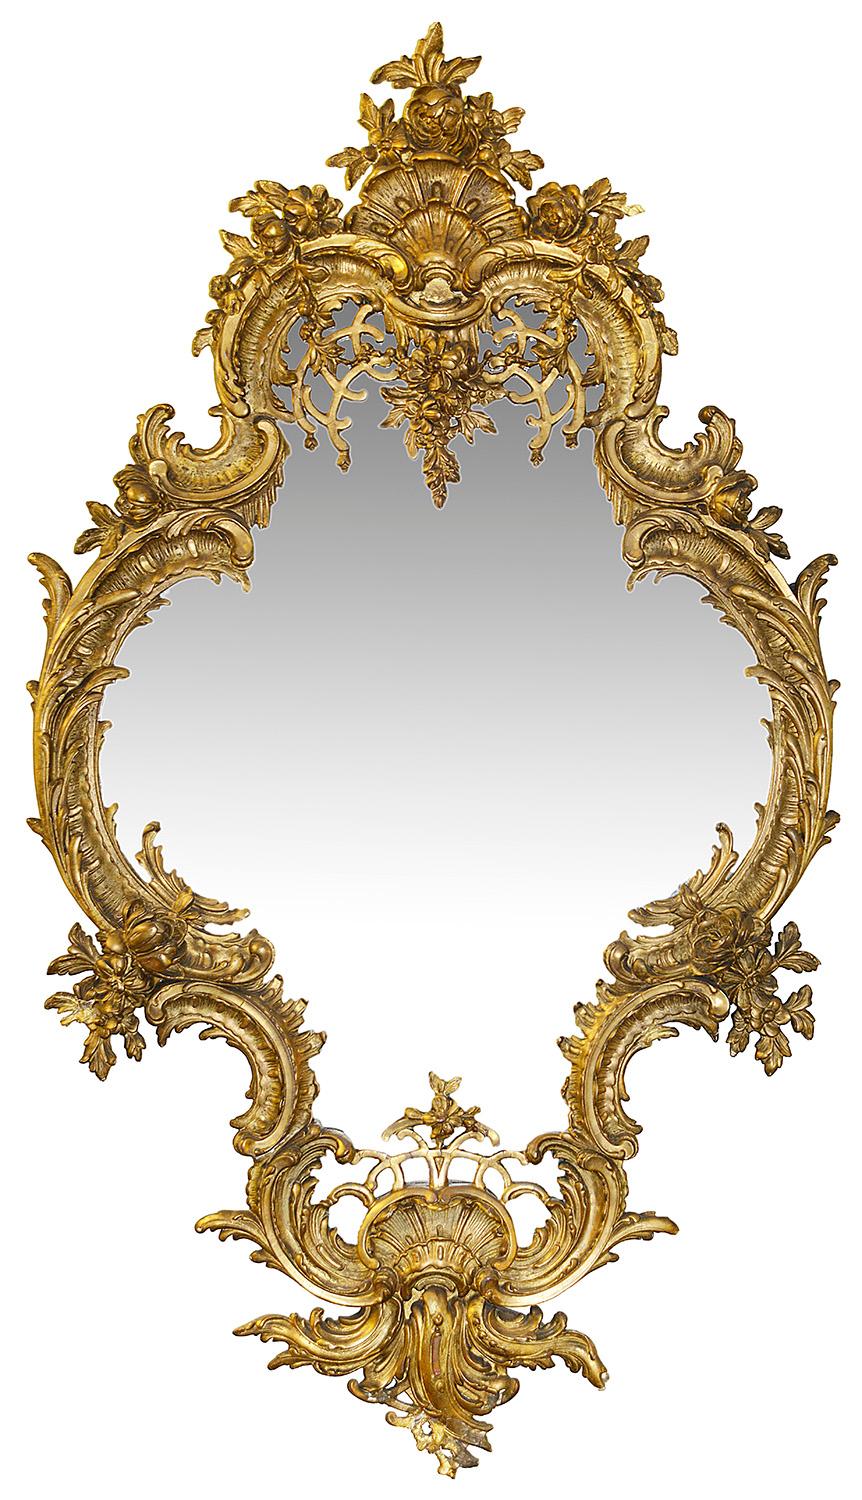 A wonderfully impressive pair of 19th century Rococo style carved gilt gesso wall/pier glass mirrors. Each with scrolling 'C' scroll, foliate and pierced trellis decoration. Measure: 58